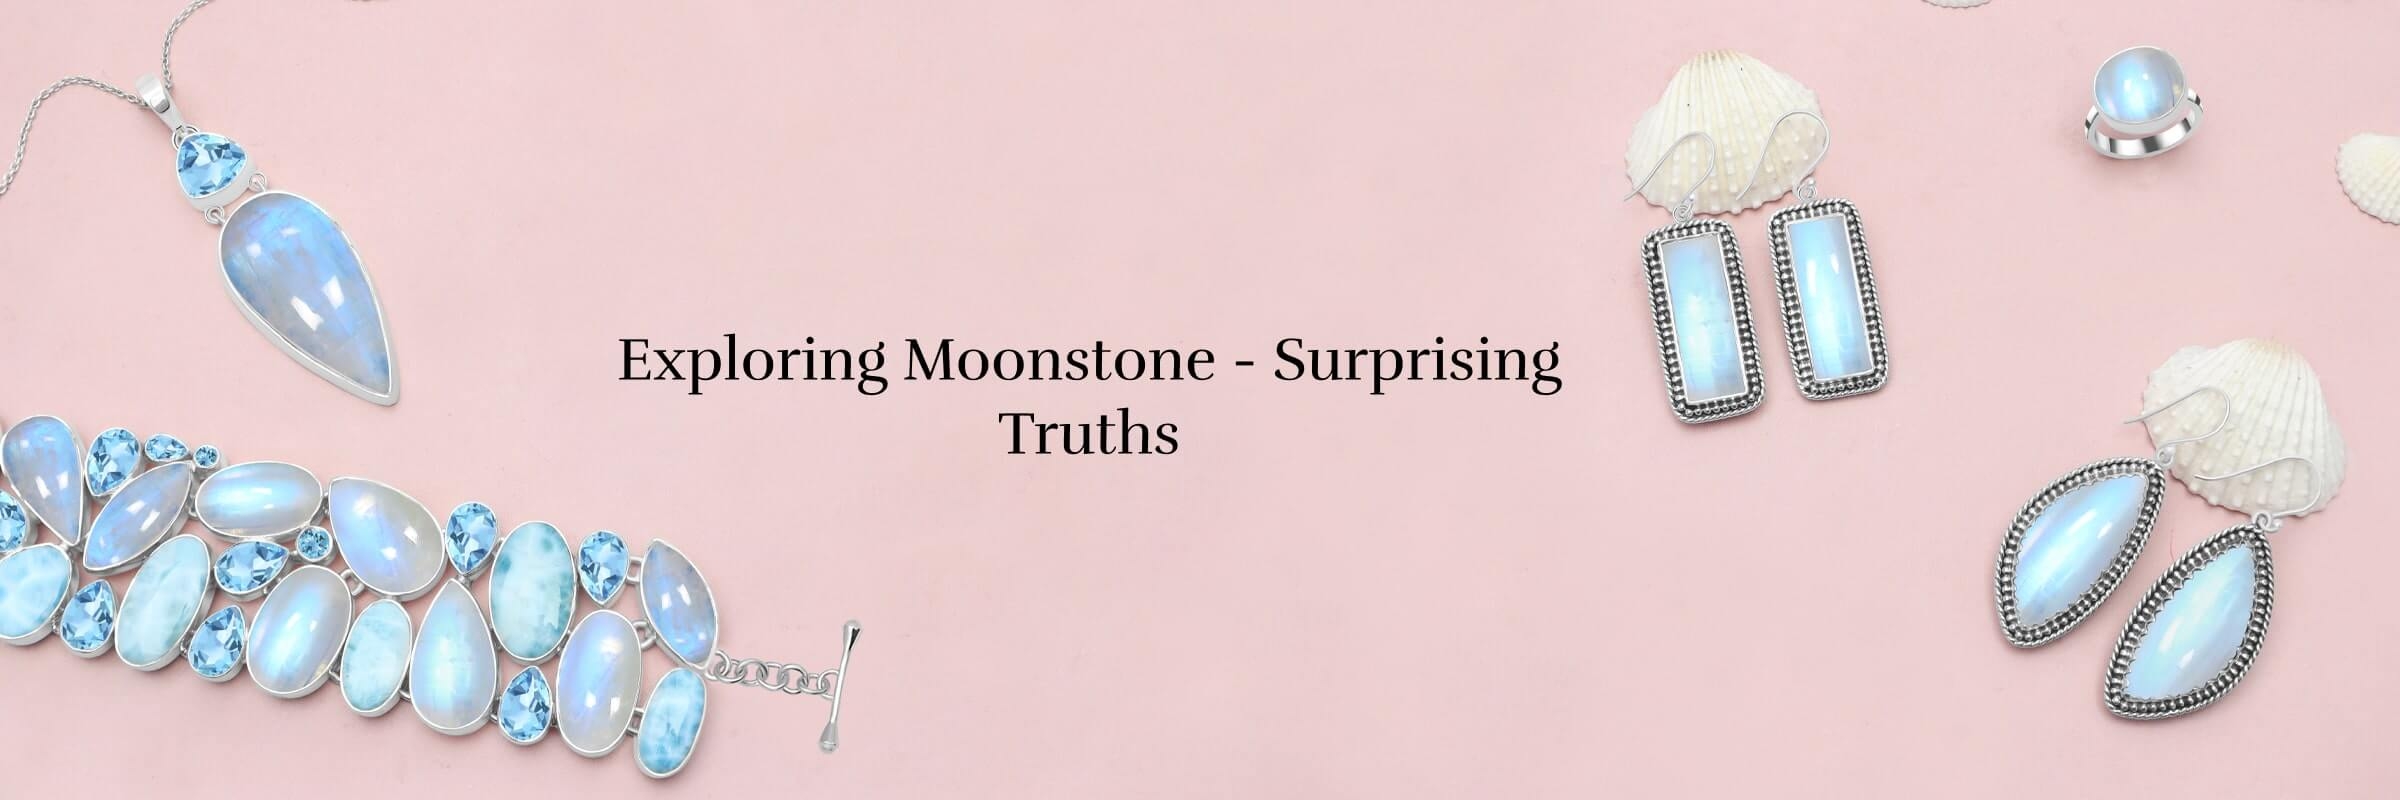 Facts About Moonstone